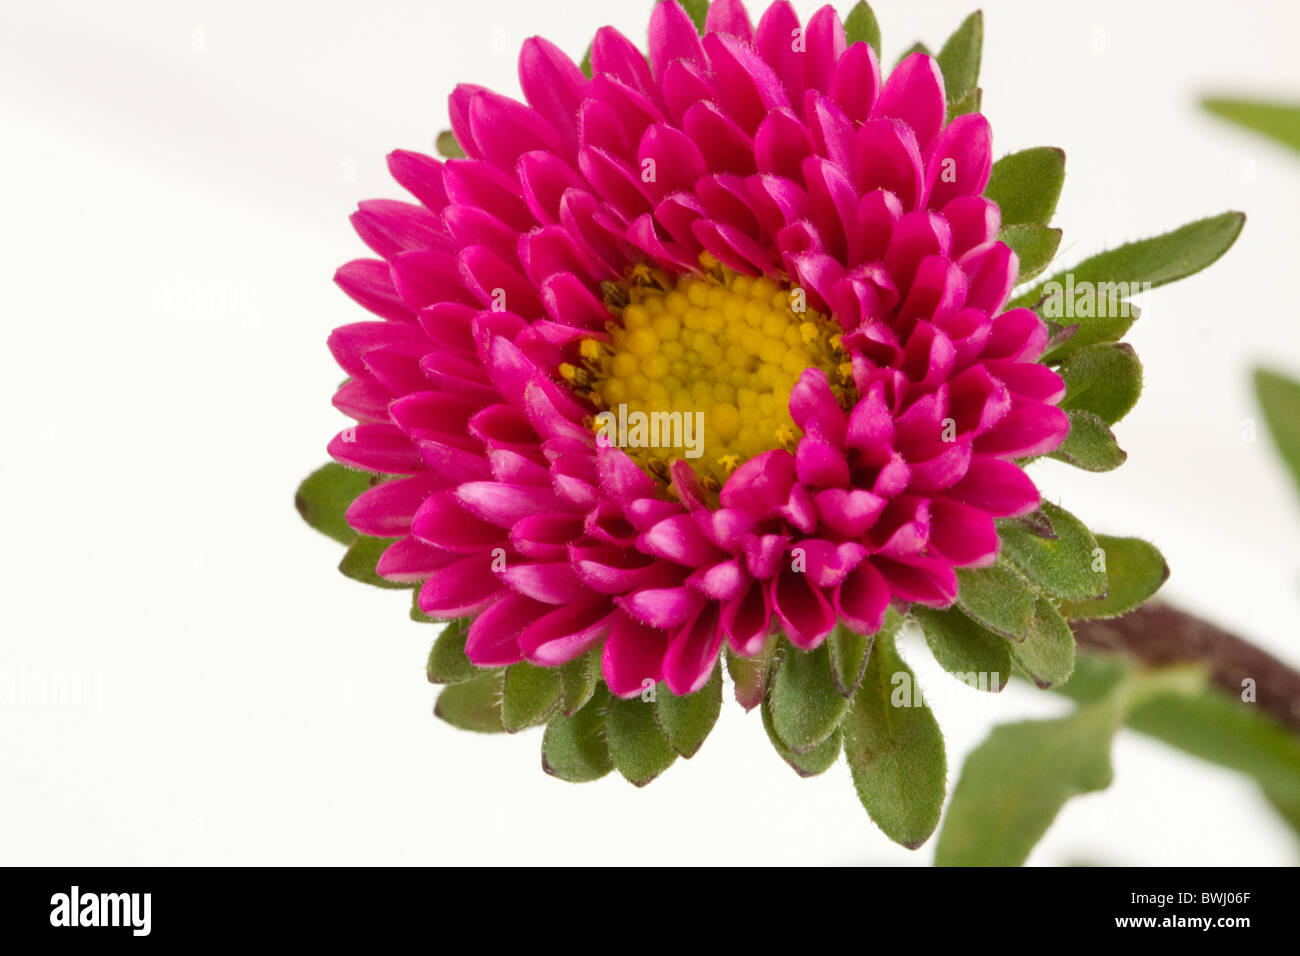 Red China Aster Flower against white background Stock Photo